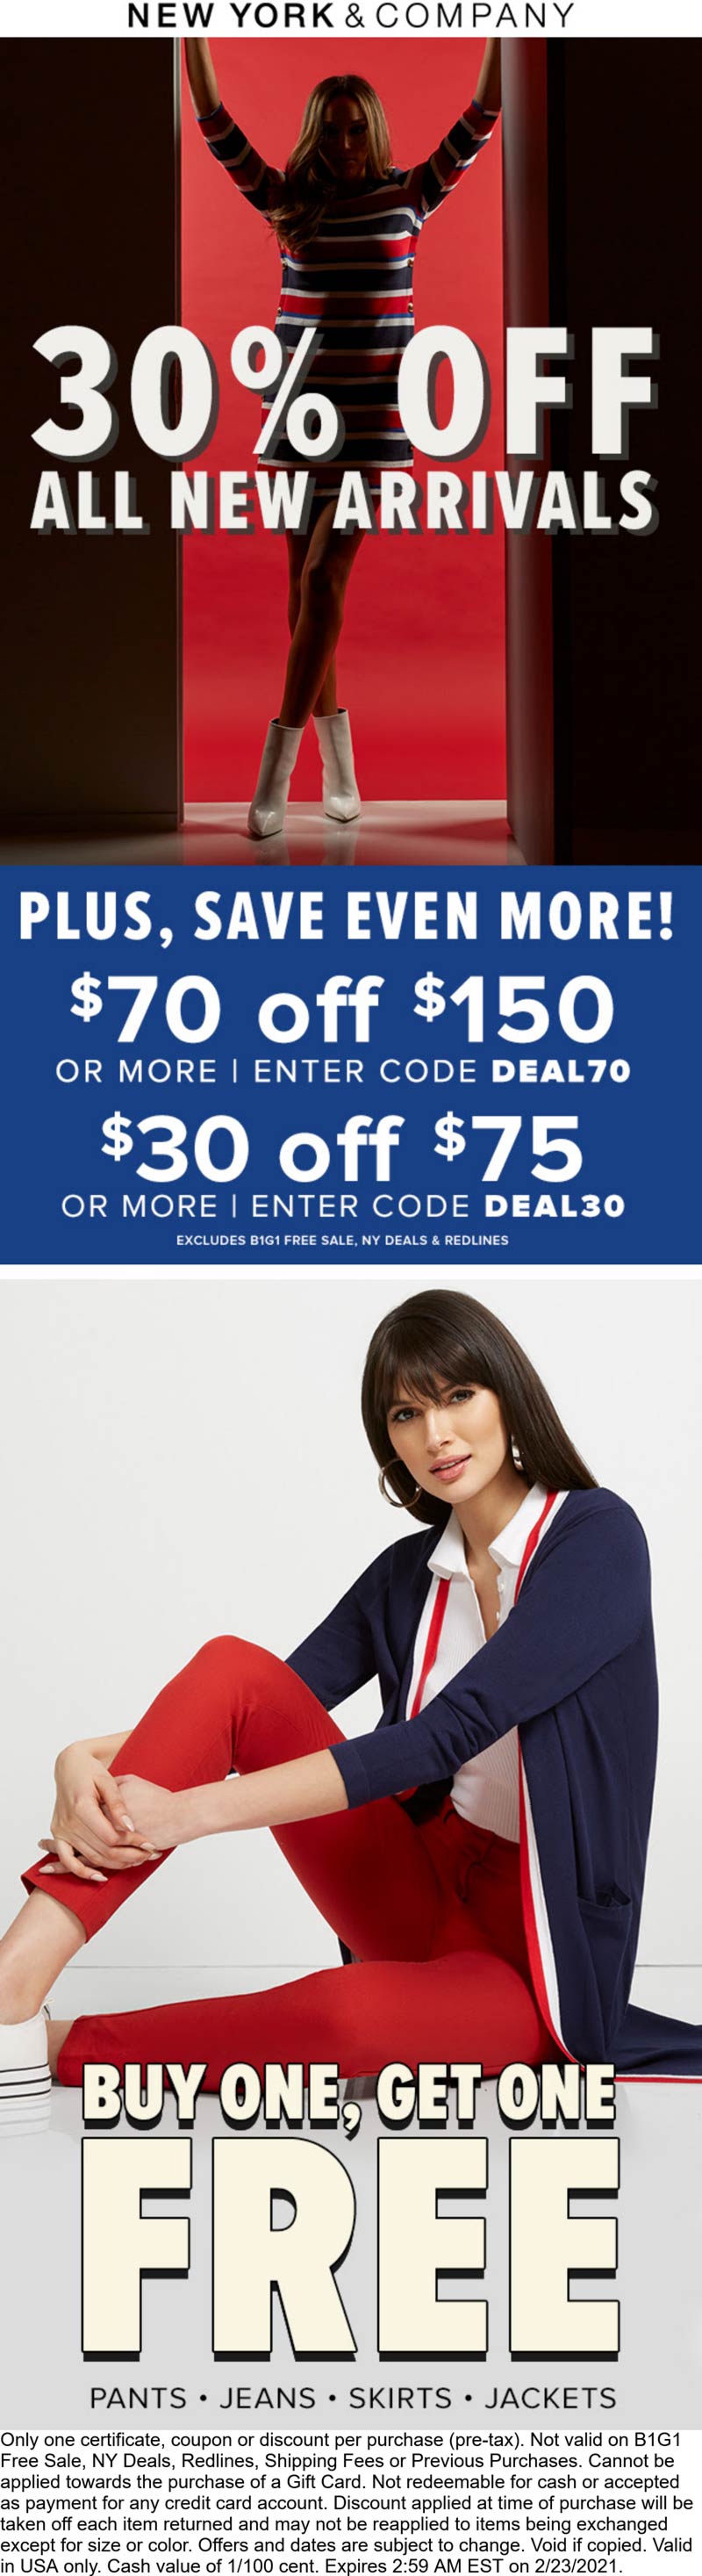 New York & Company stores Coupon  Second item free & more today at New York & Company via promo code DEAL30 #newyorkcompany 